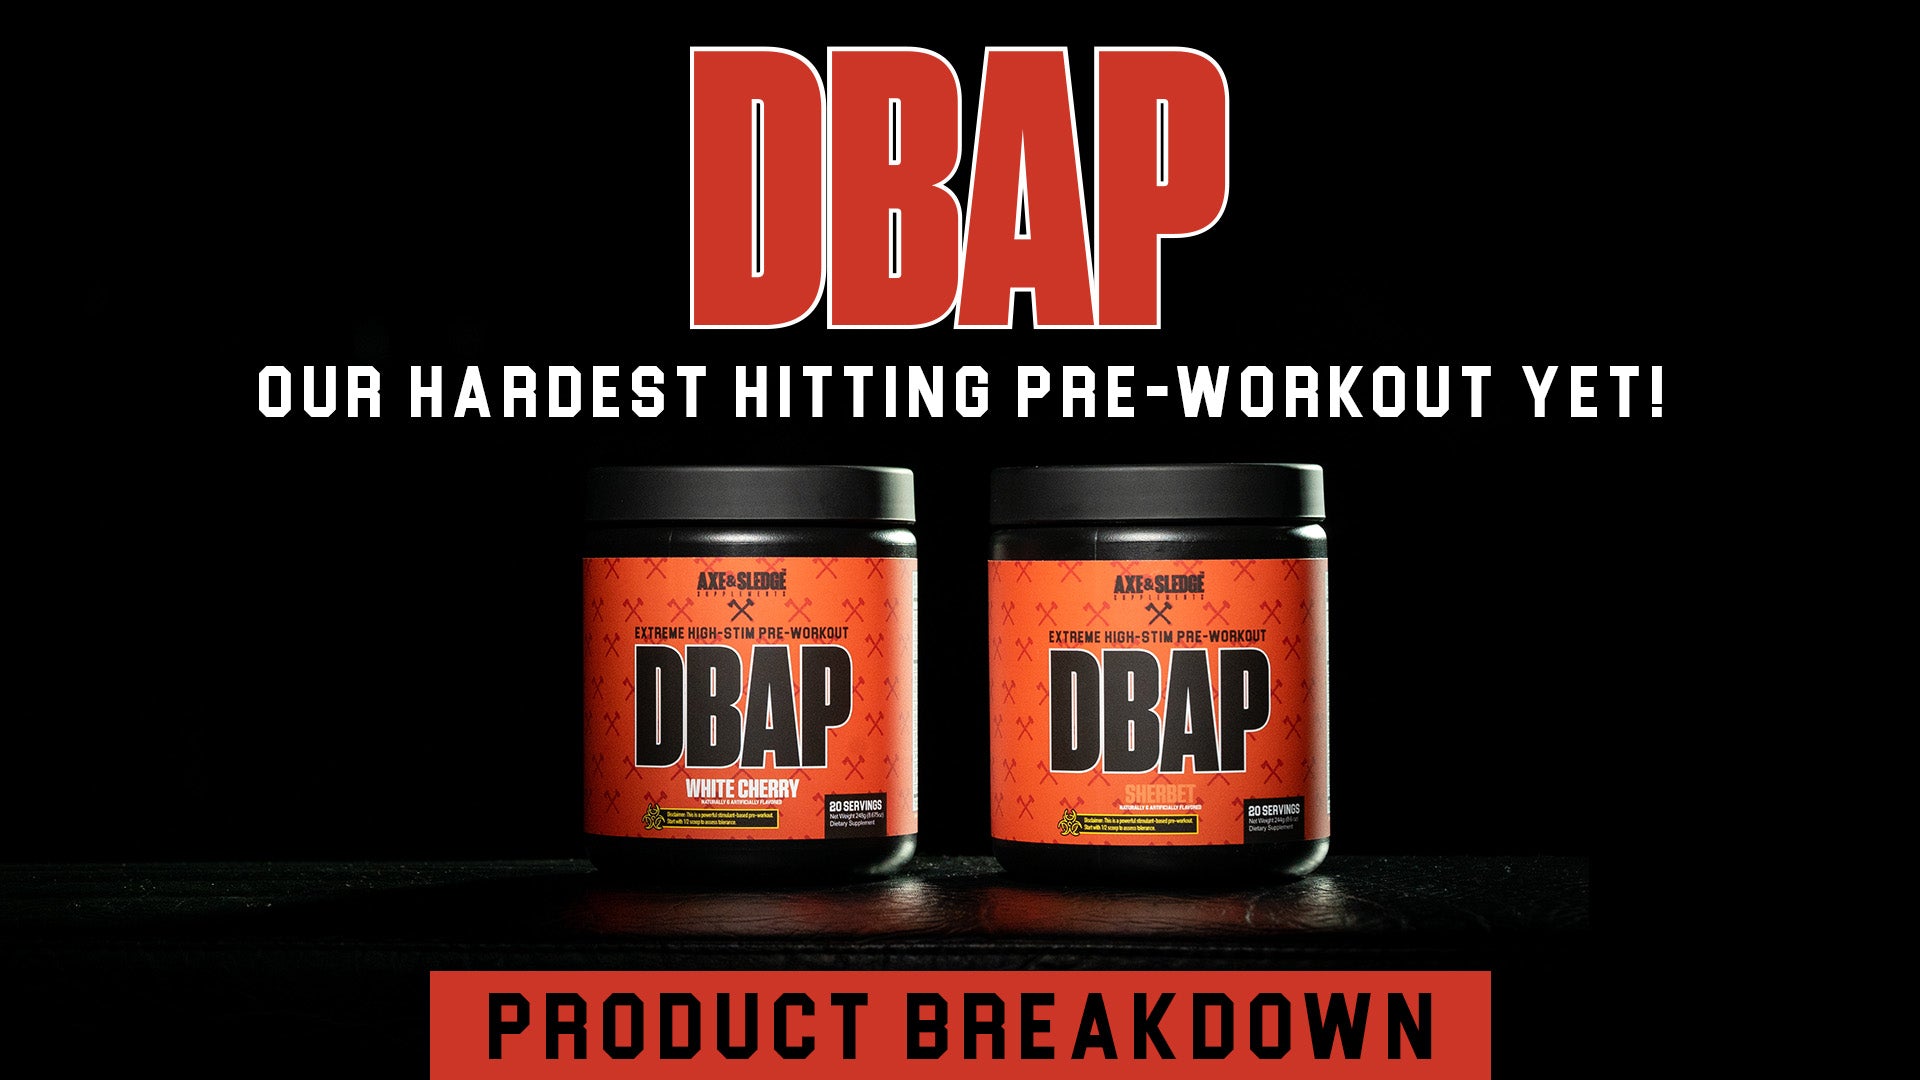 DBAP: Our Hardest Hitting Pre-Workout Yet